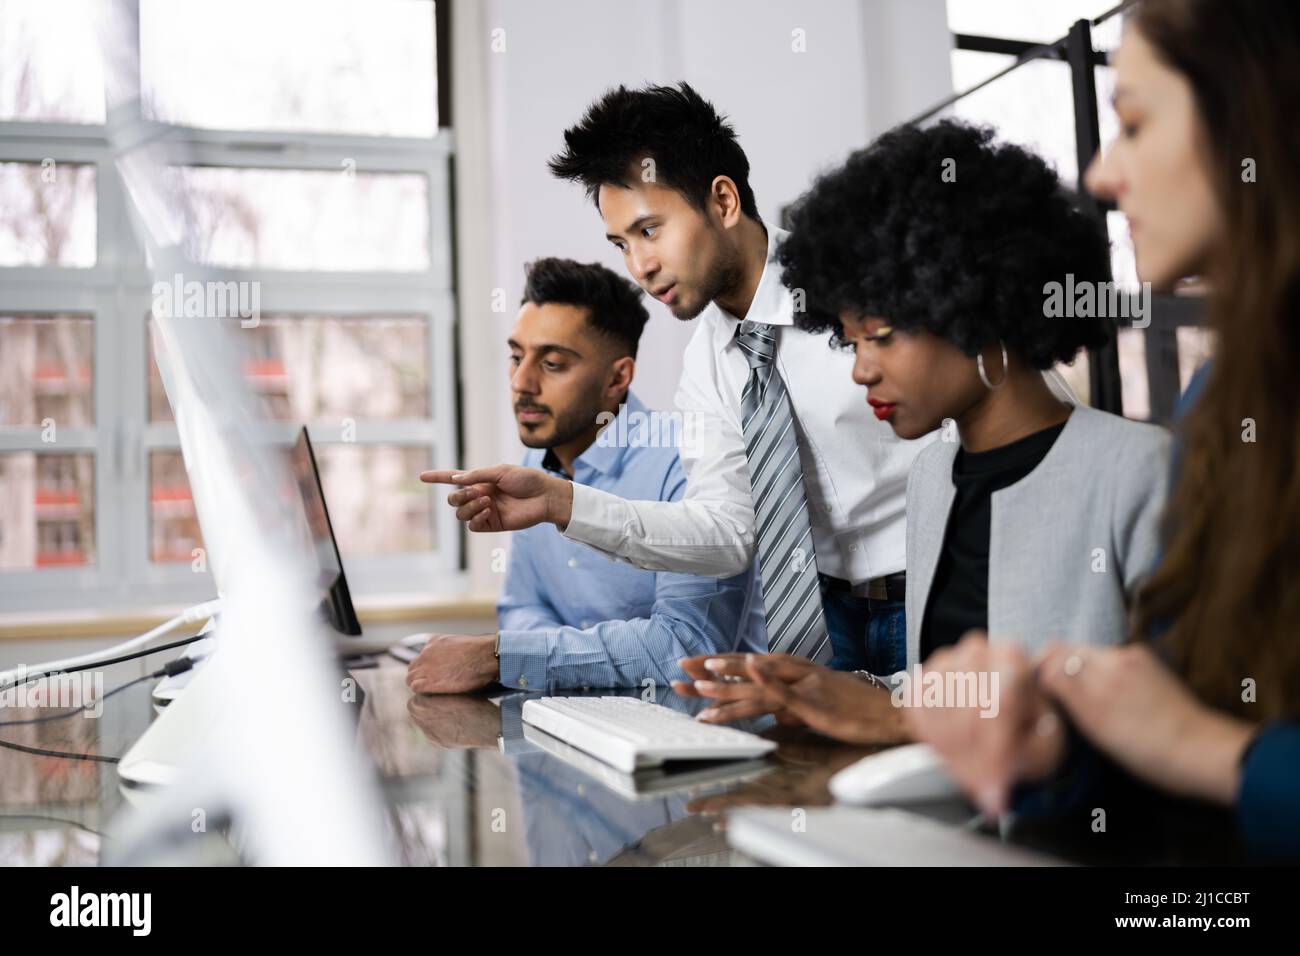 Group Of Happy Business People Using Laptop Discussing At Workplace In Office Stock Photo